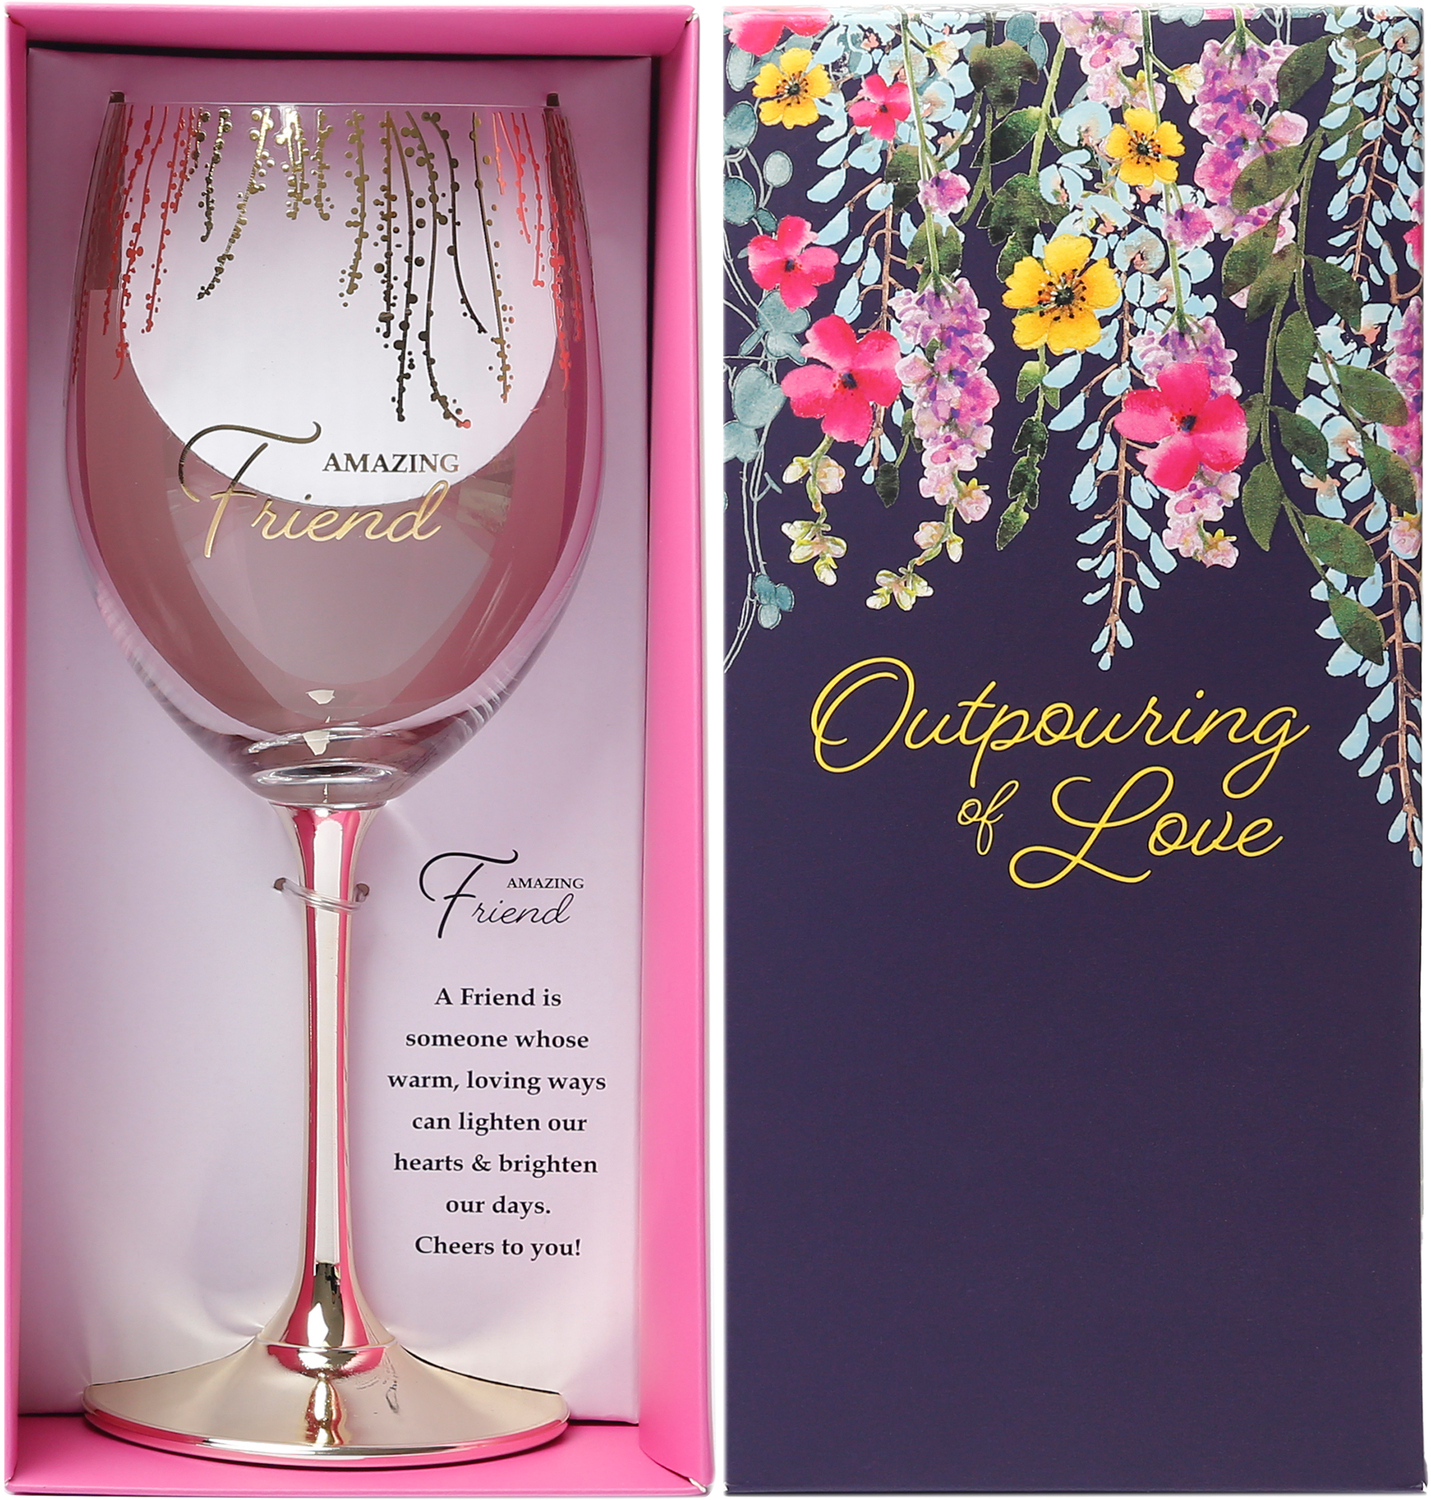 Friend by Outpouring of Love - Friend - Gift Boxed 19 oz Crystal Wine Glass